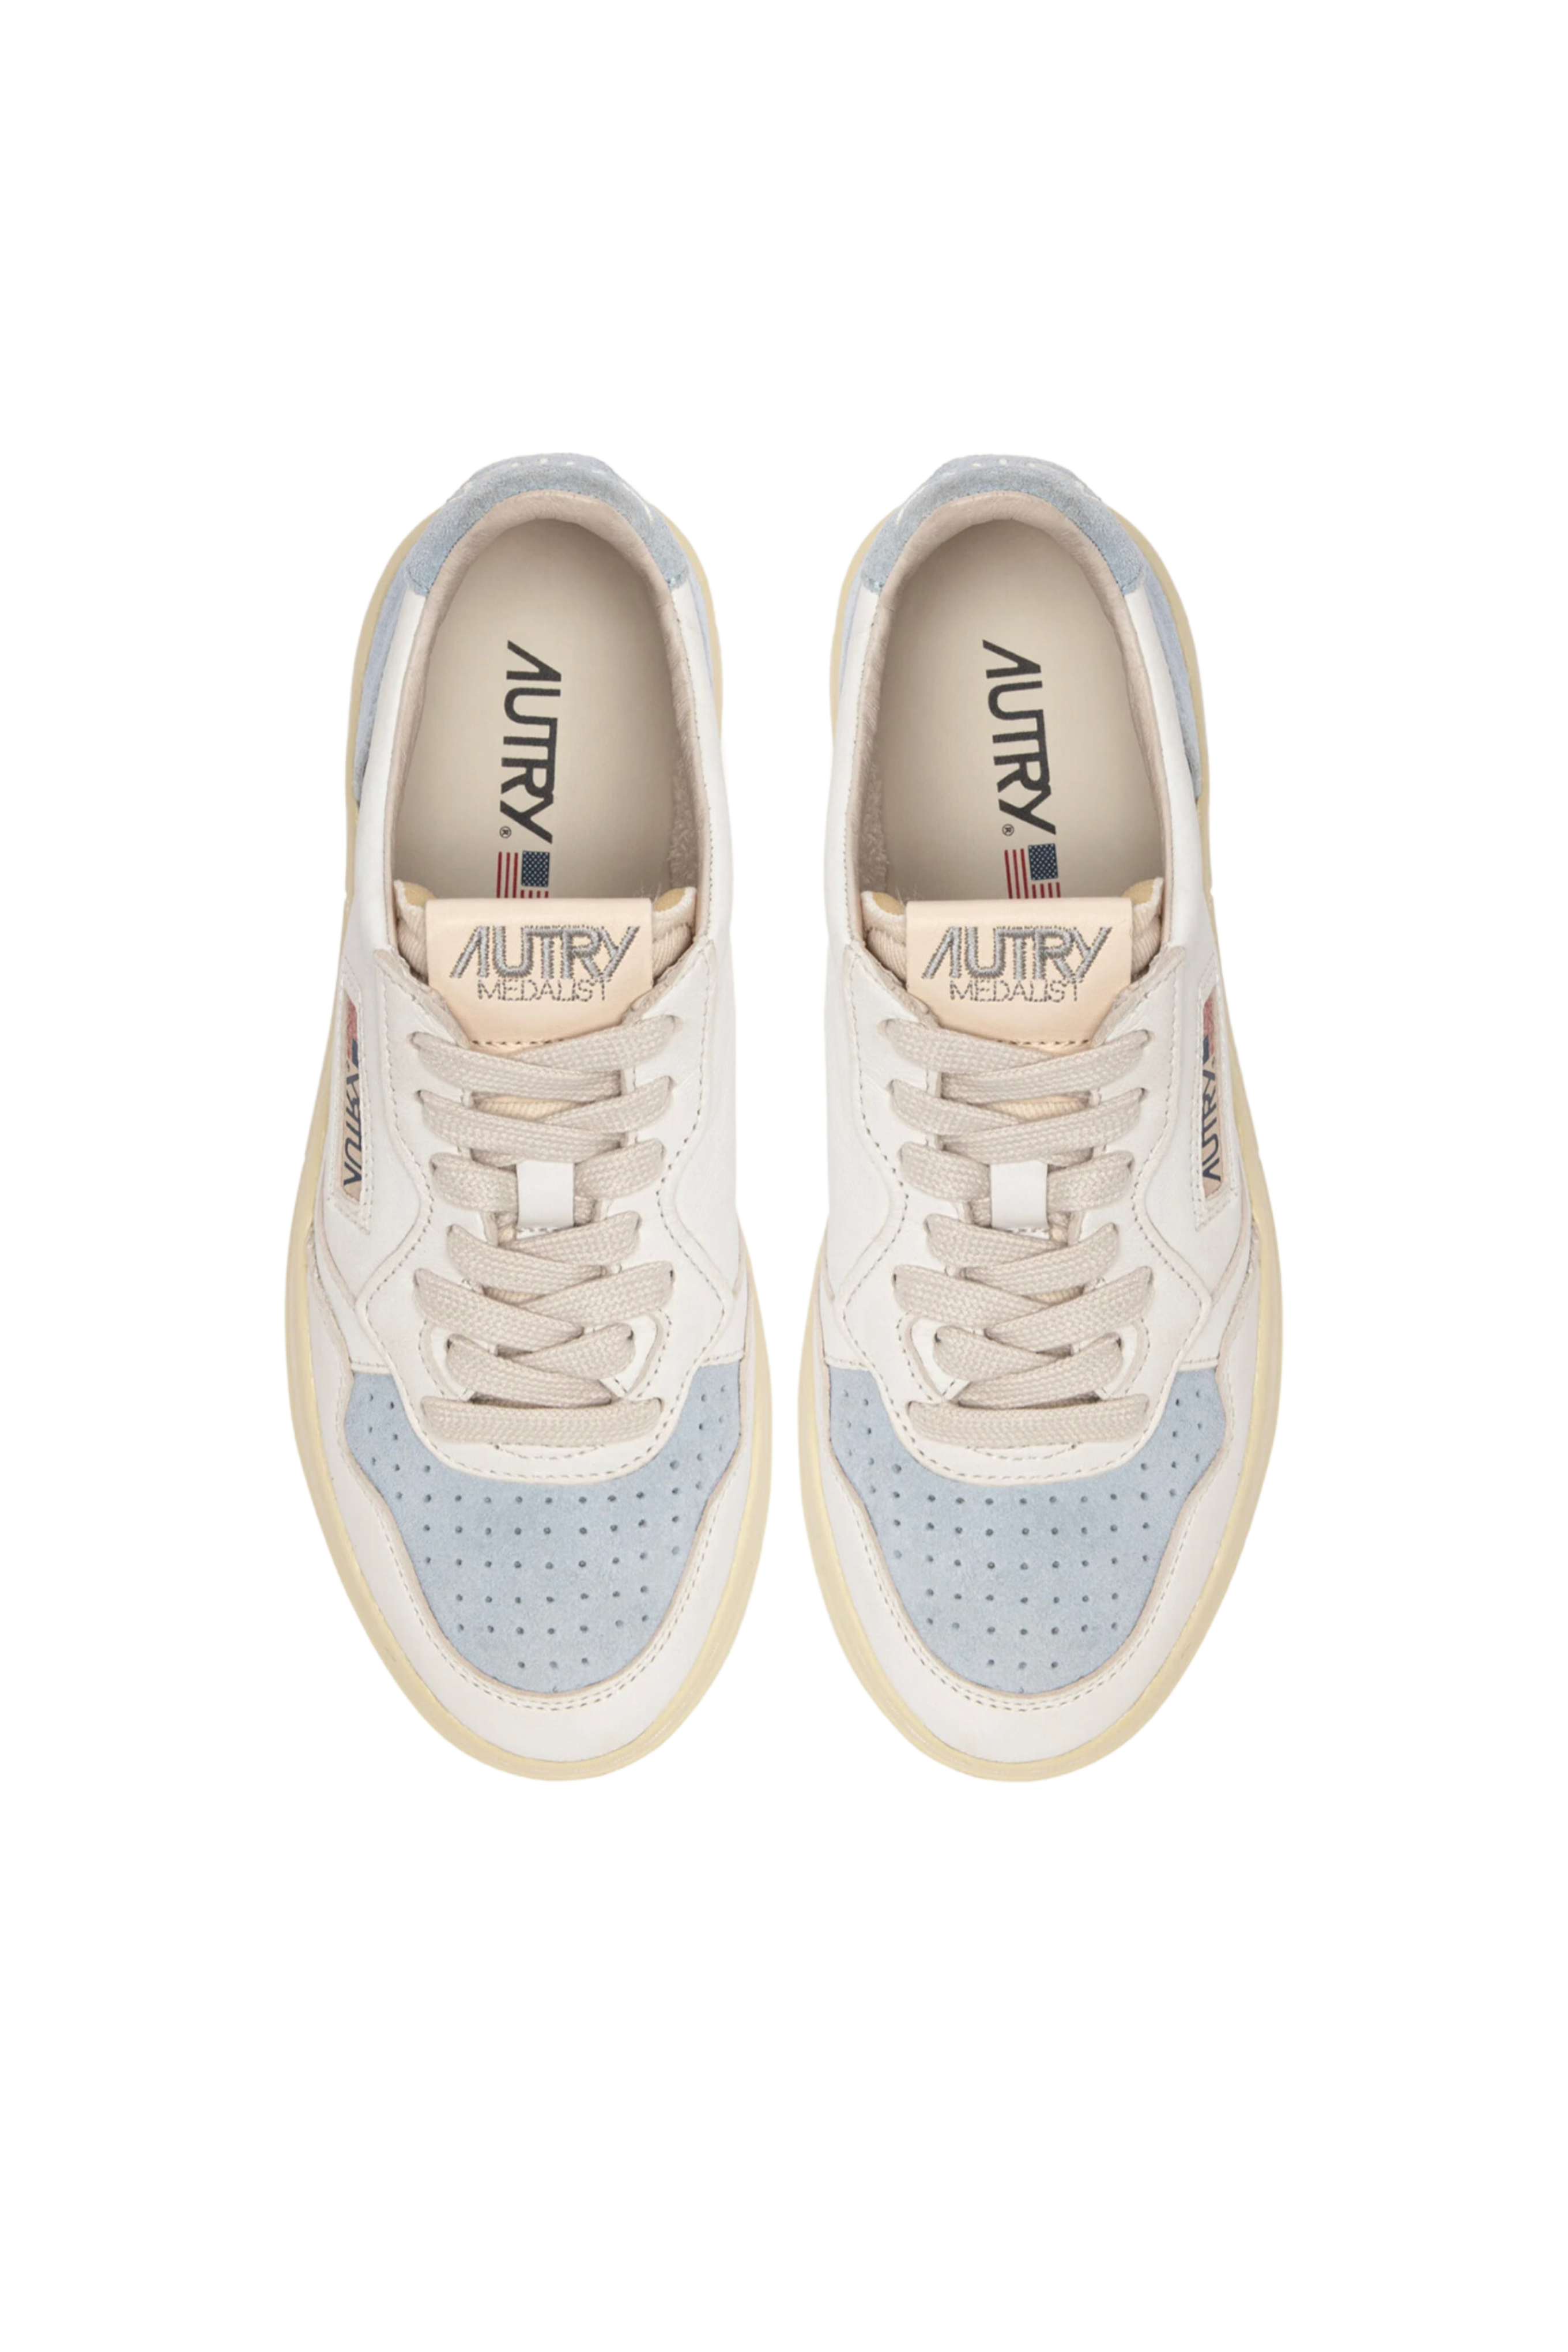 AULW-SL02 - MEDALIST LOW SNEAKER IN LEATHER AND SUEDE WHITE/TURQUOISE